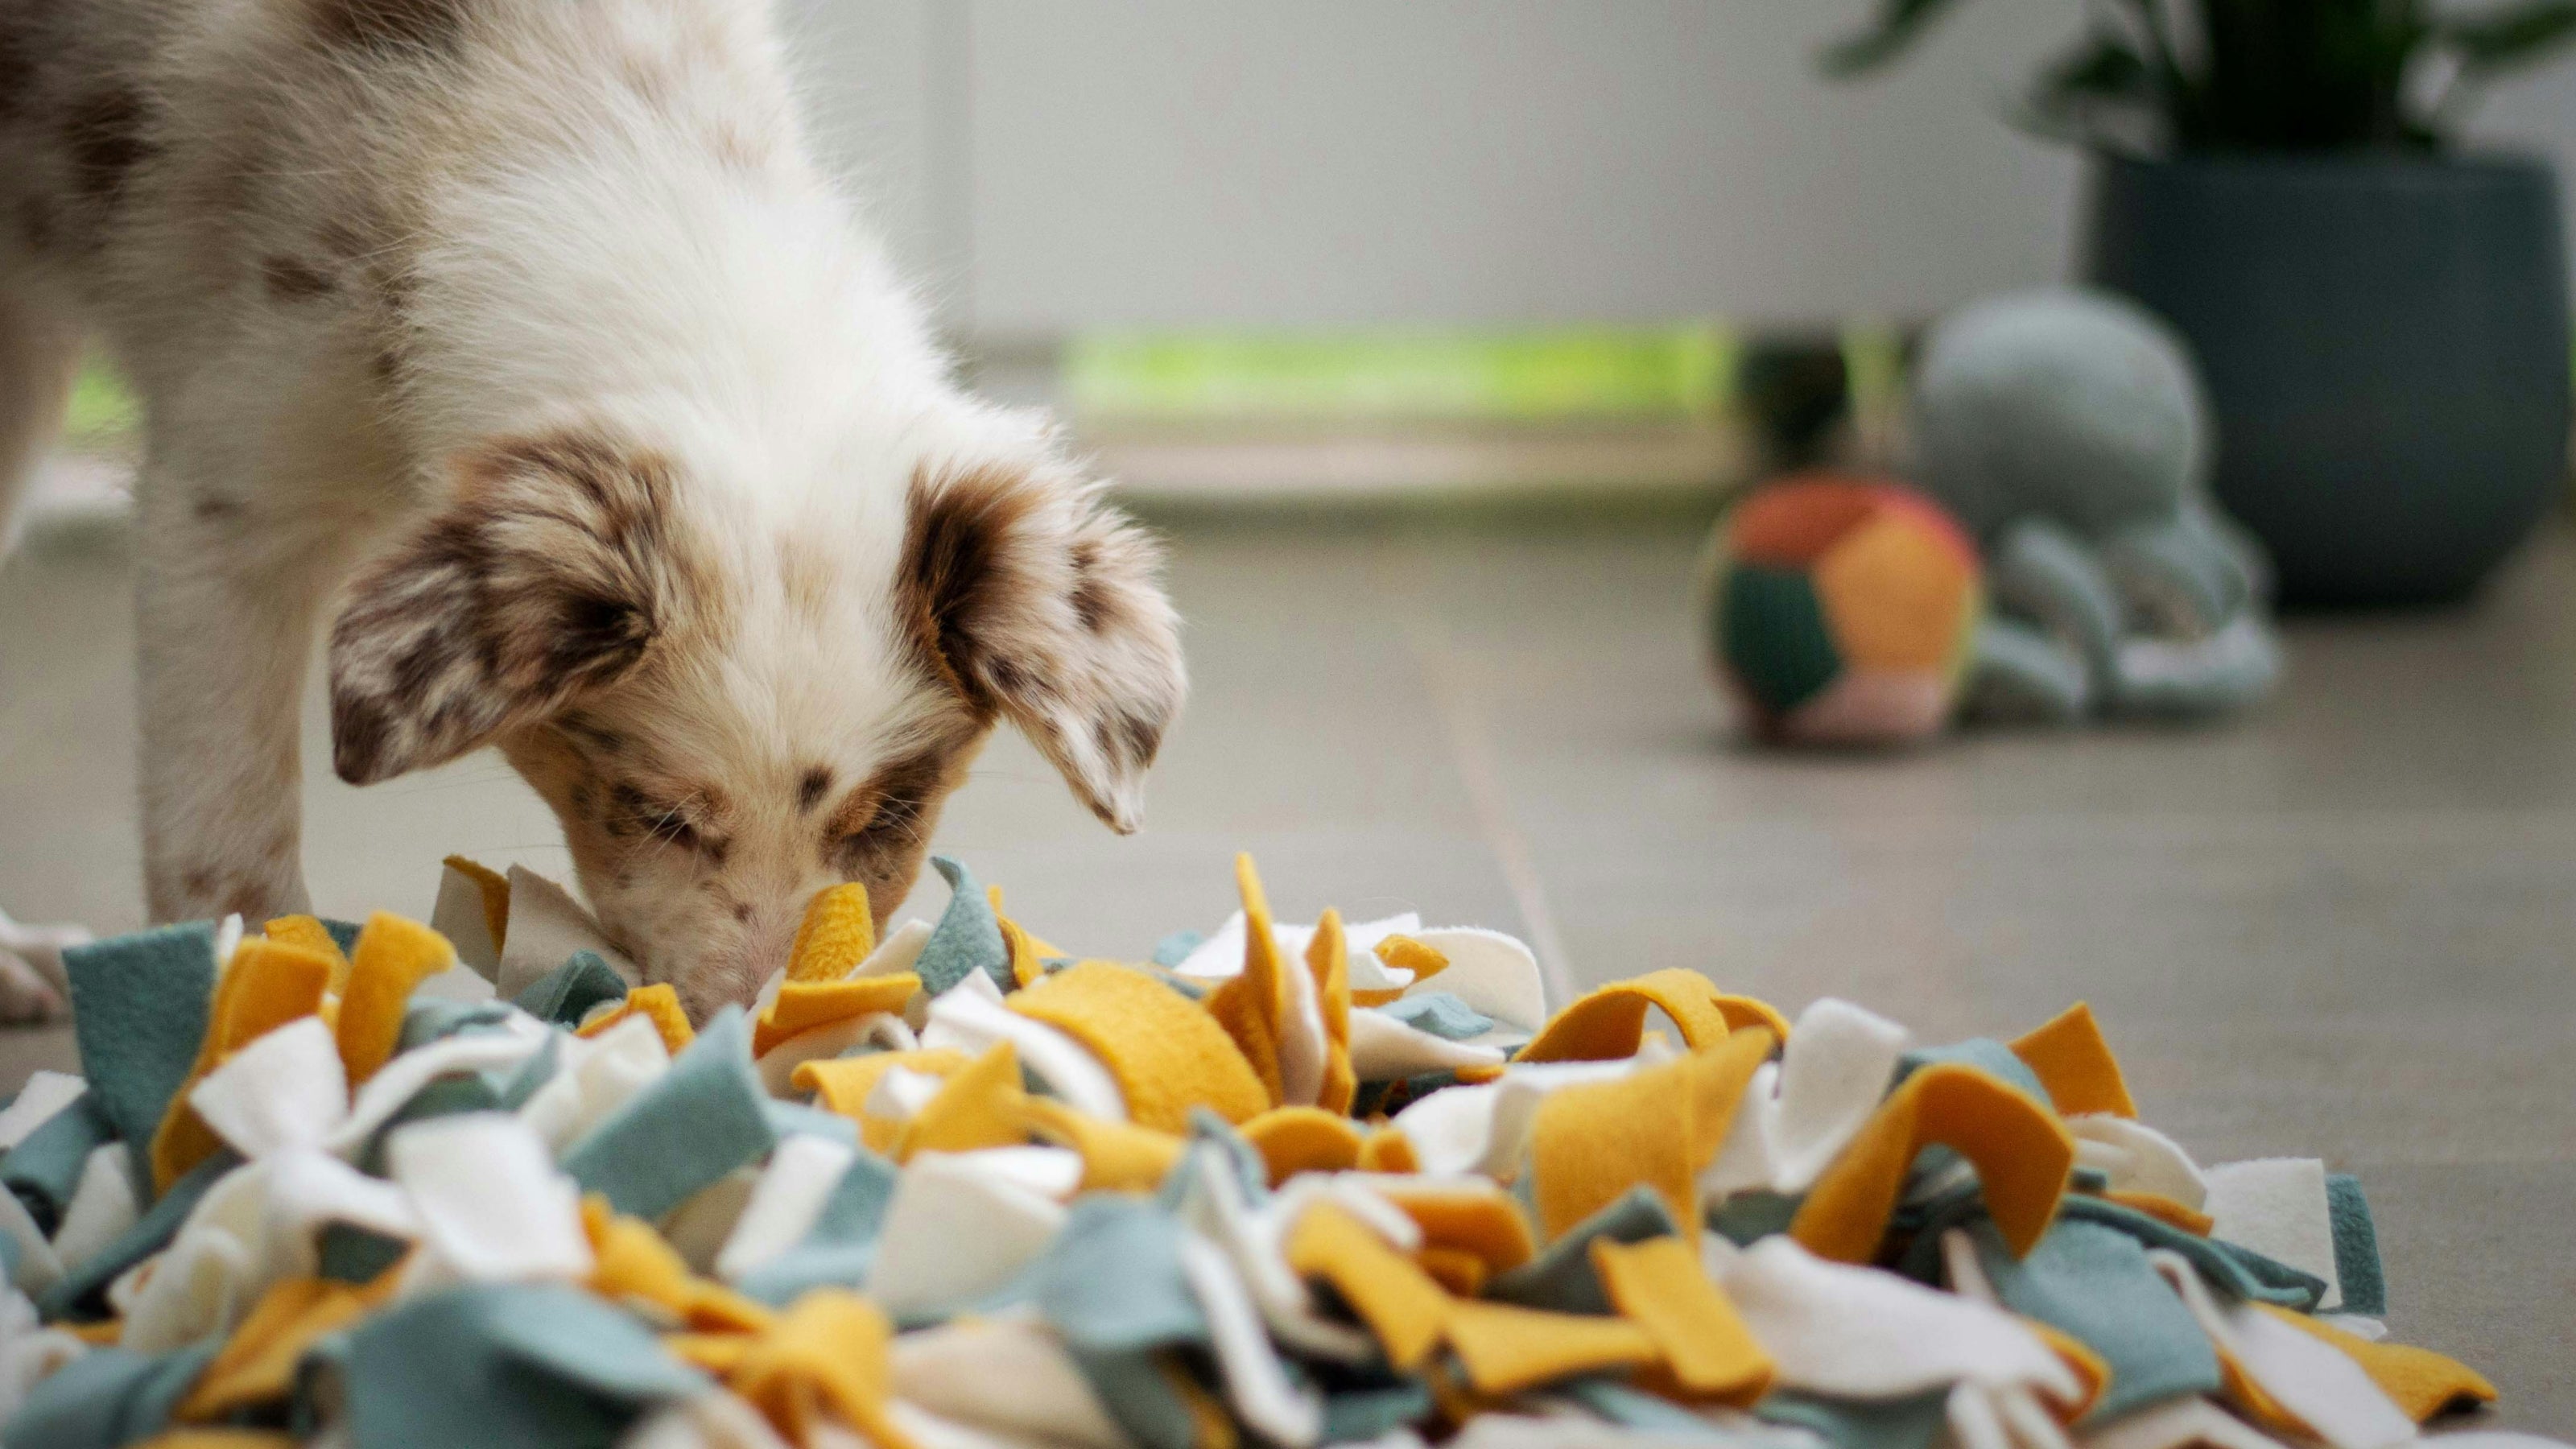 A white dog with brown speckles sniffs at a colorful felt tie blanket